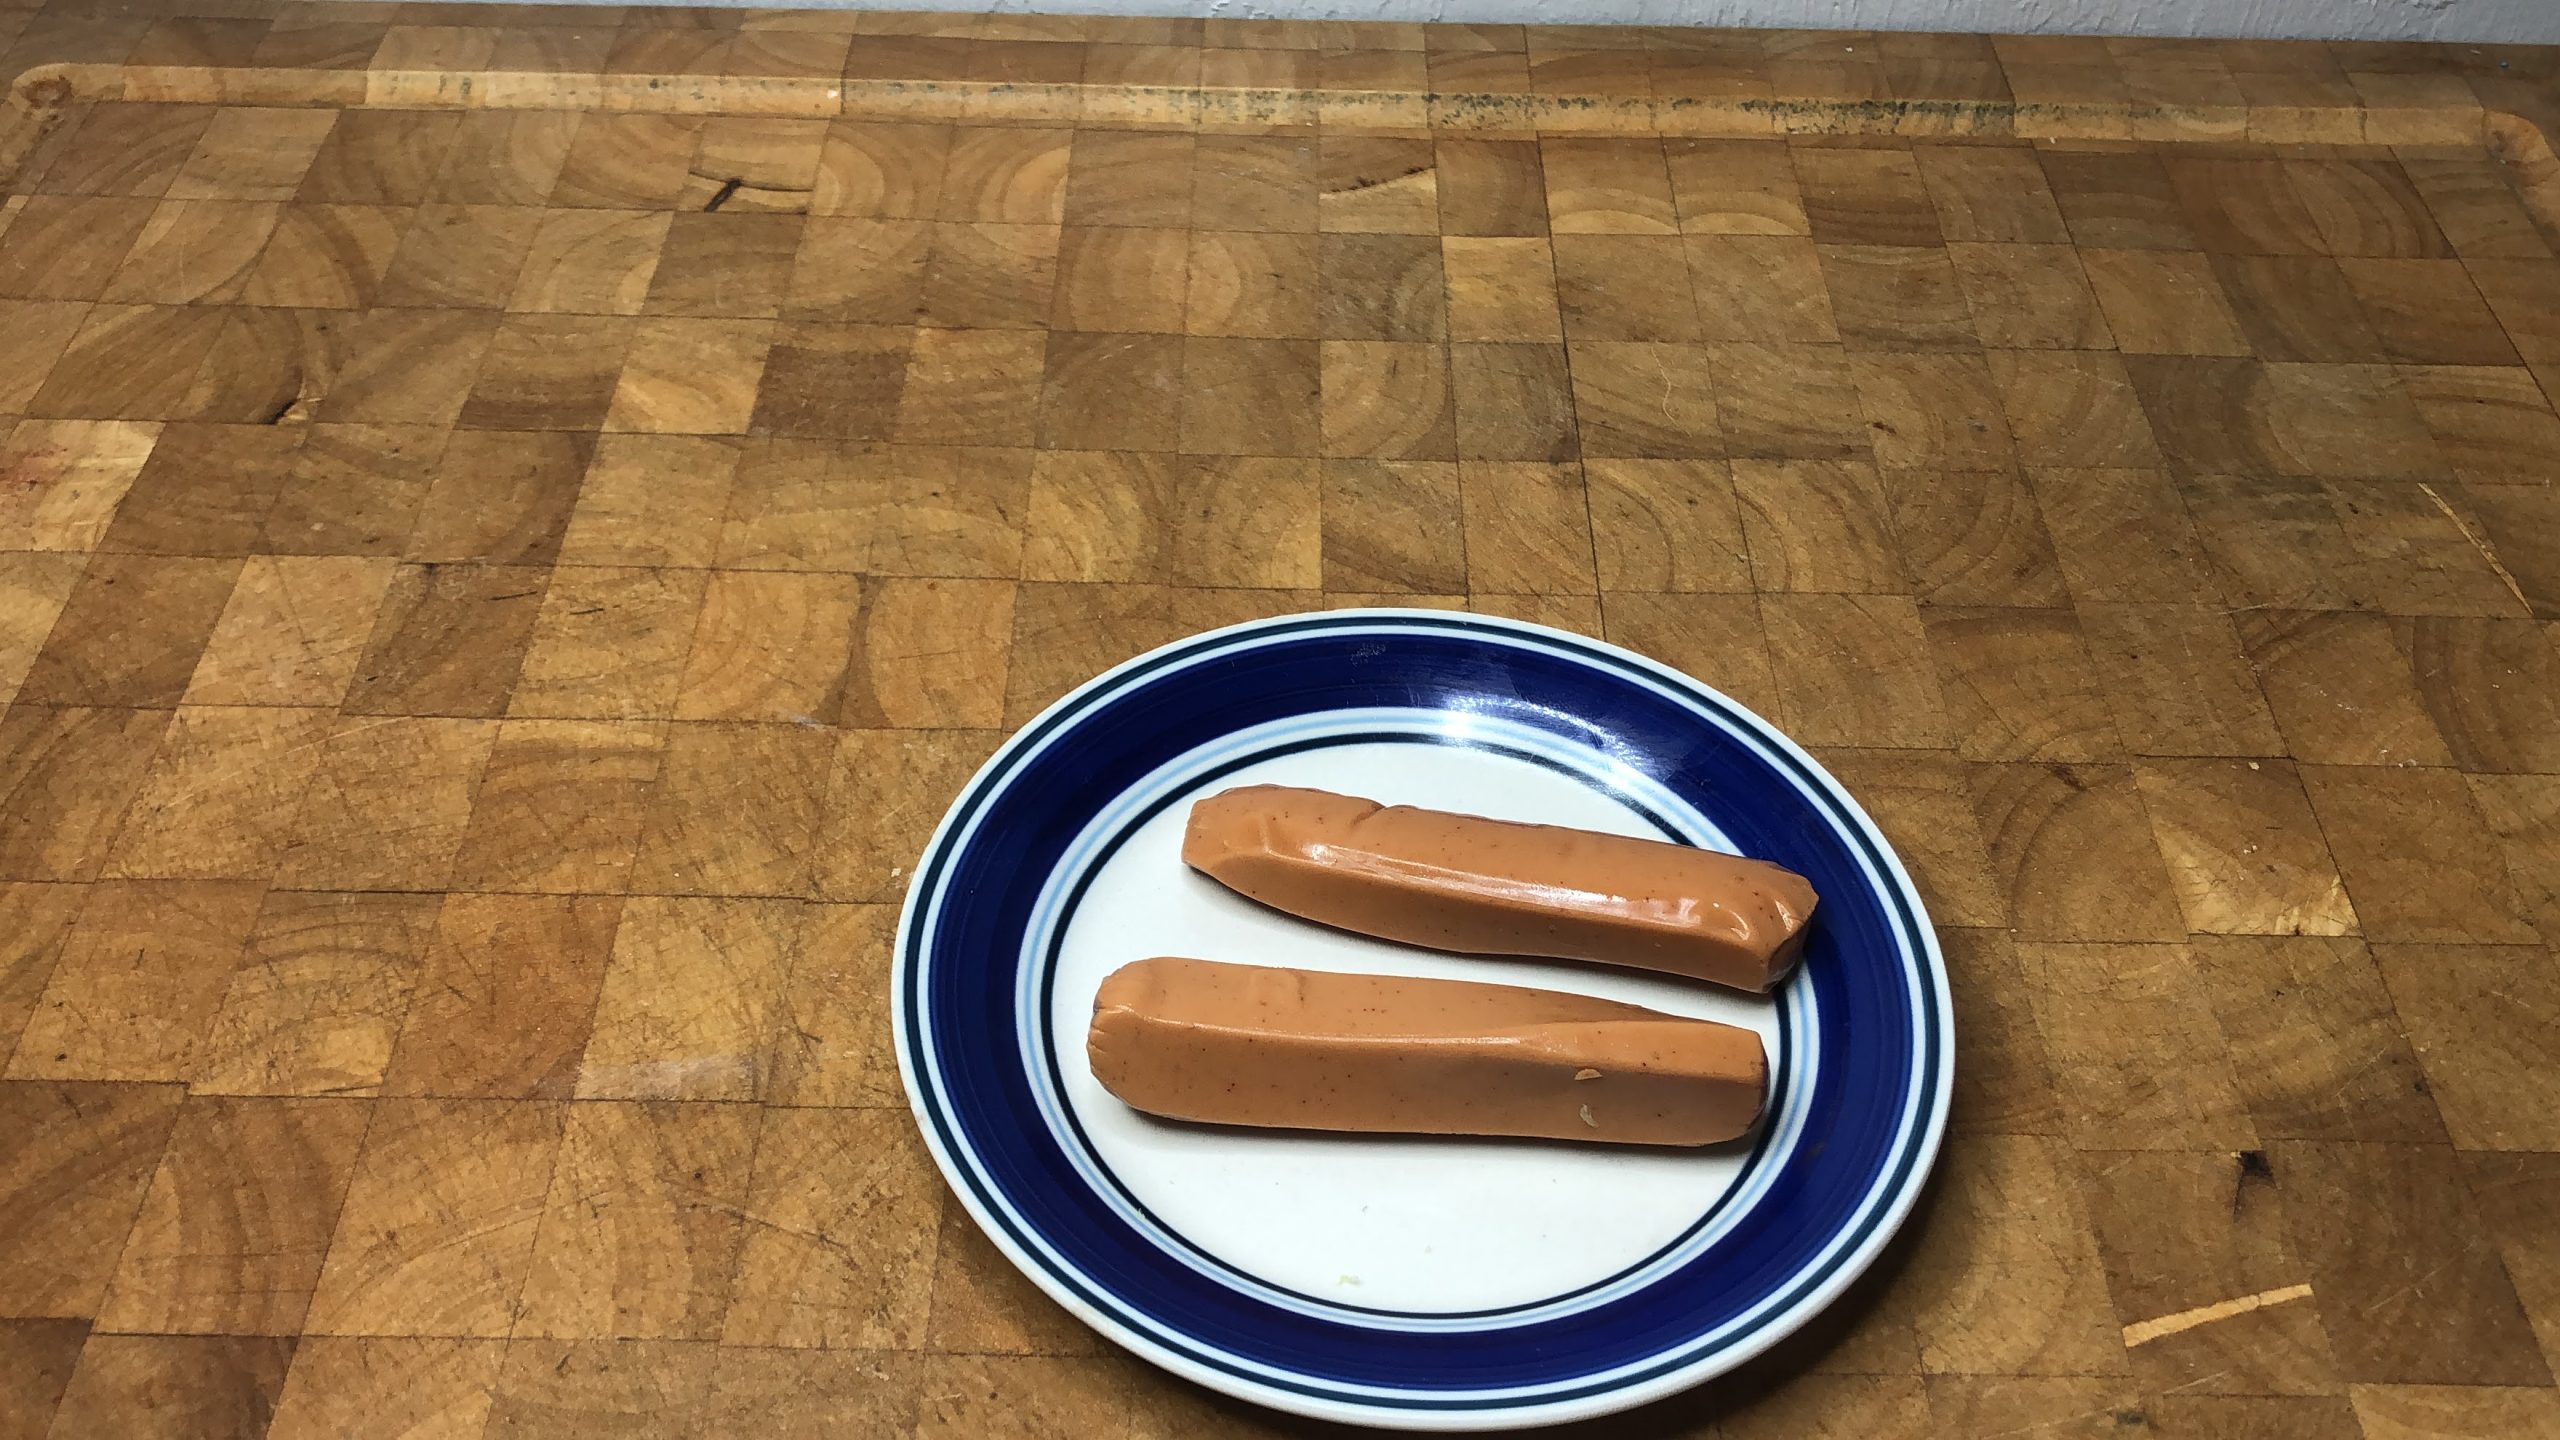 two hot dogs on a plate on a wooden table